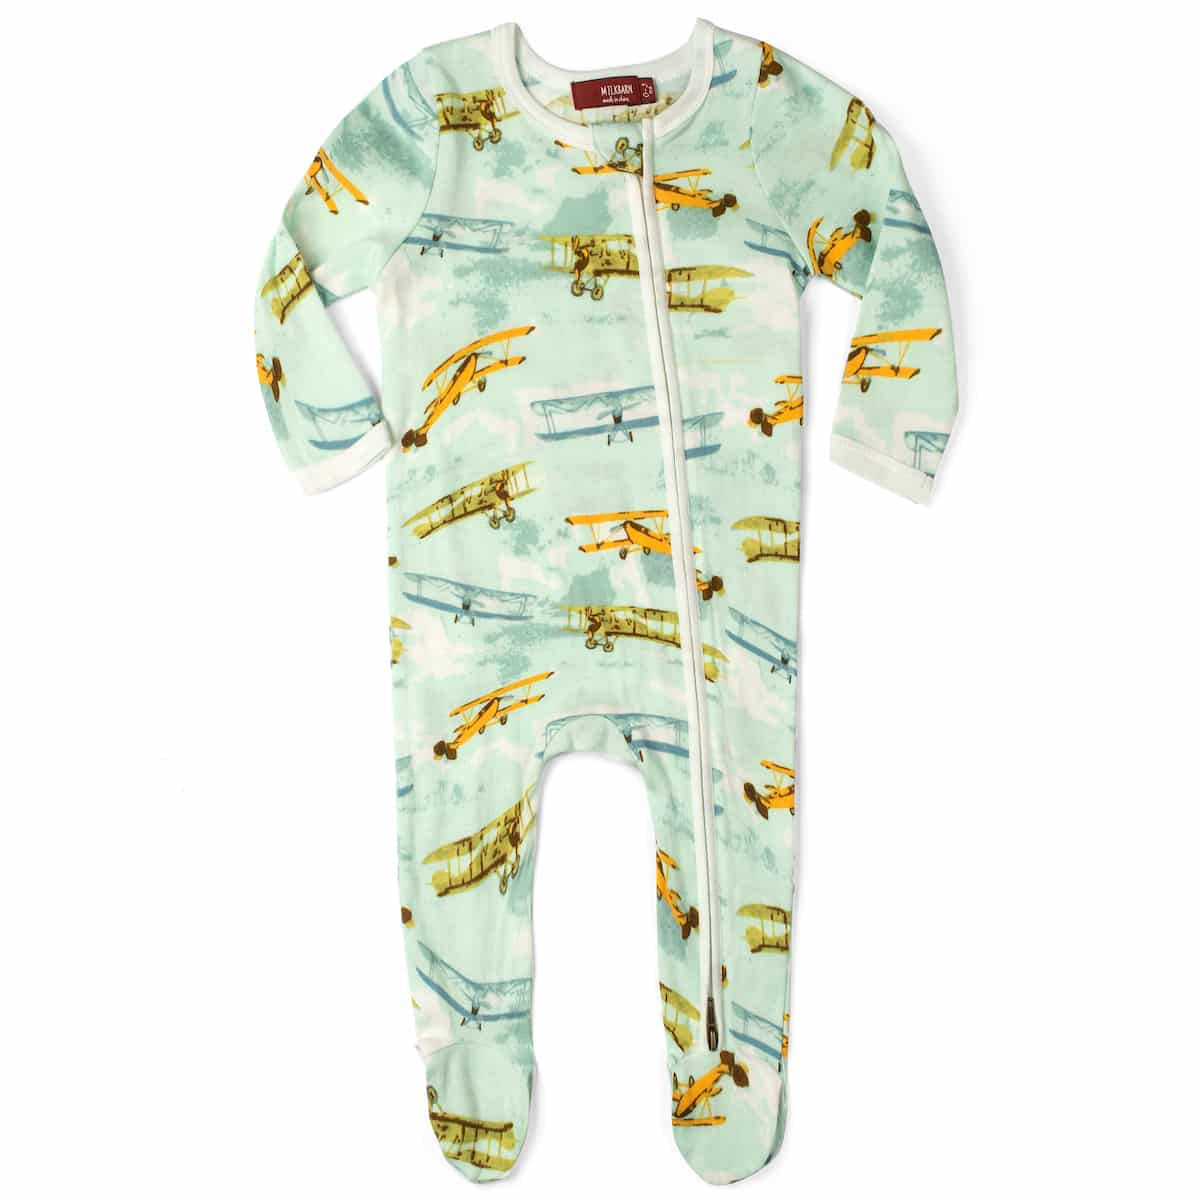 Vintage Planes Zippered Footed Romper 3-6 M